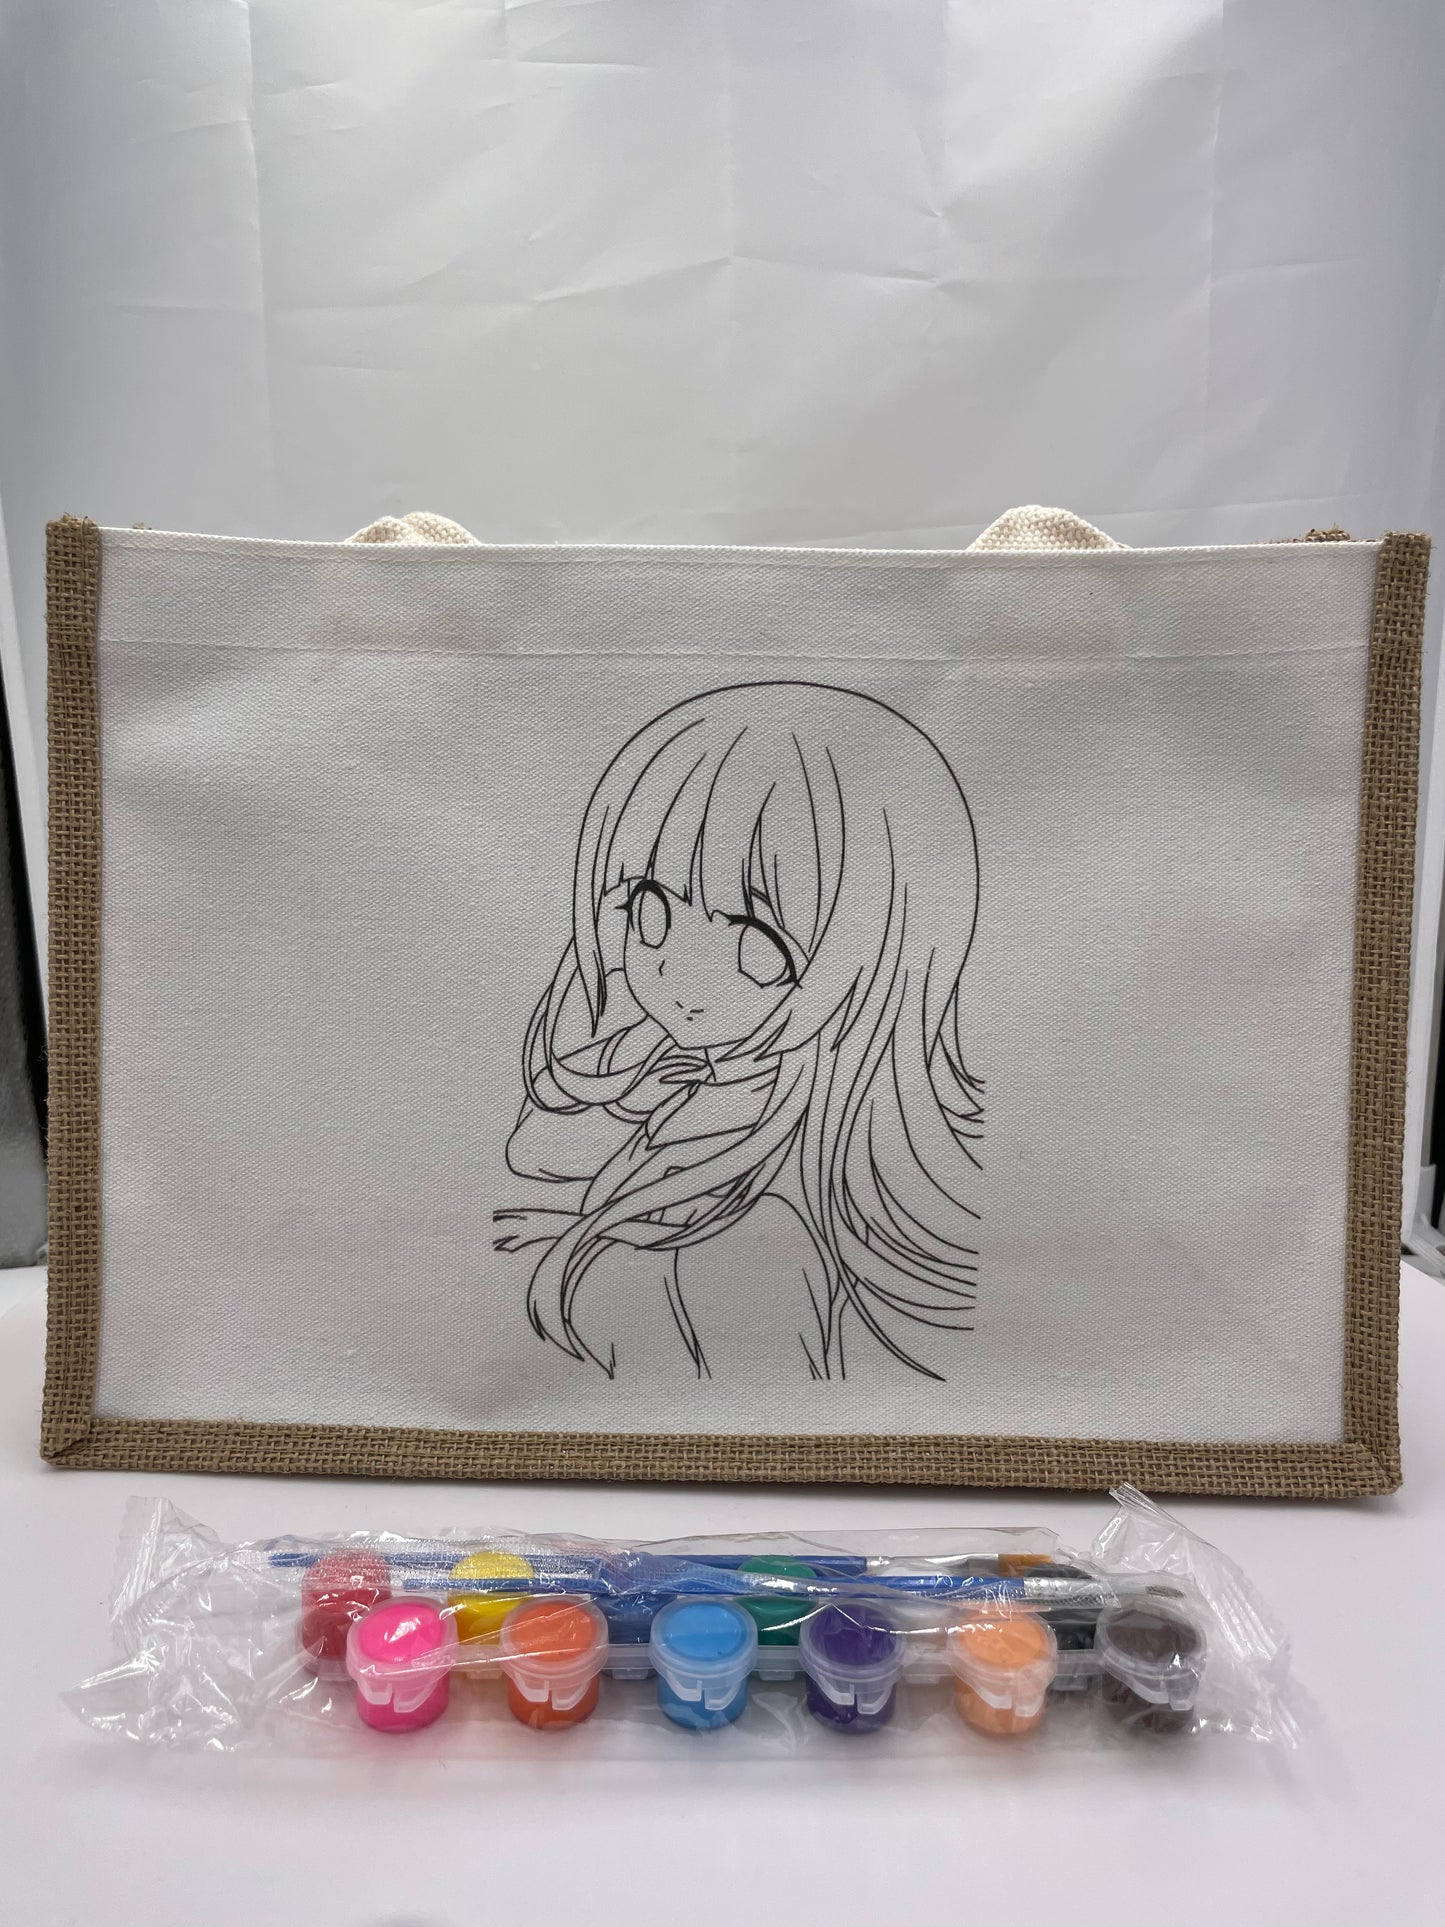 Children Canvas Bag for Painting/Decorating